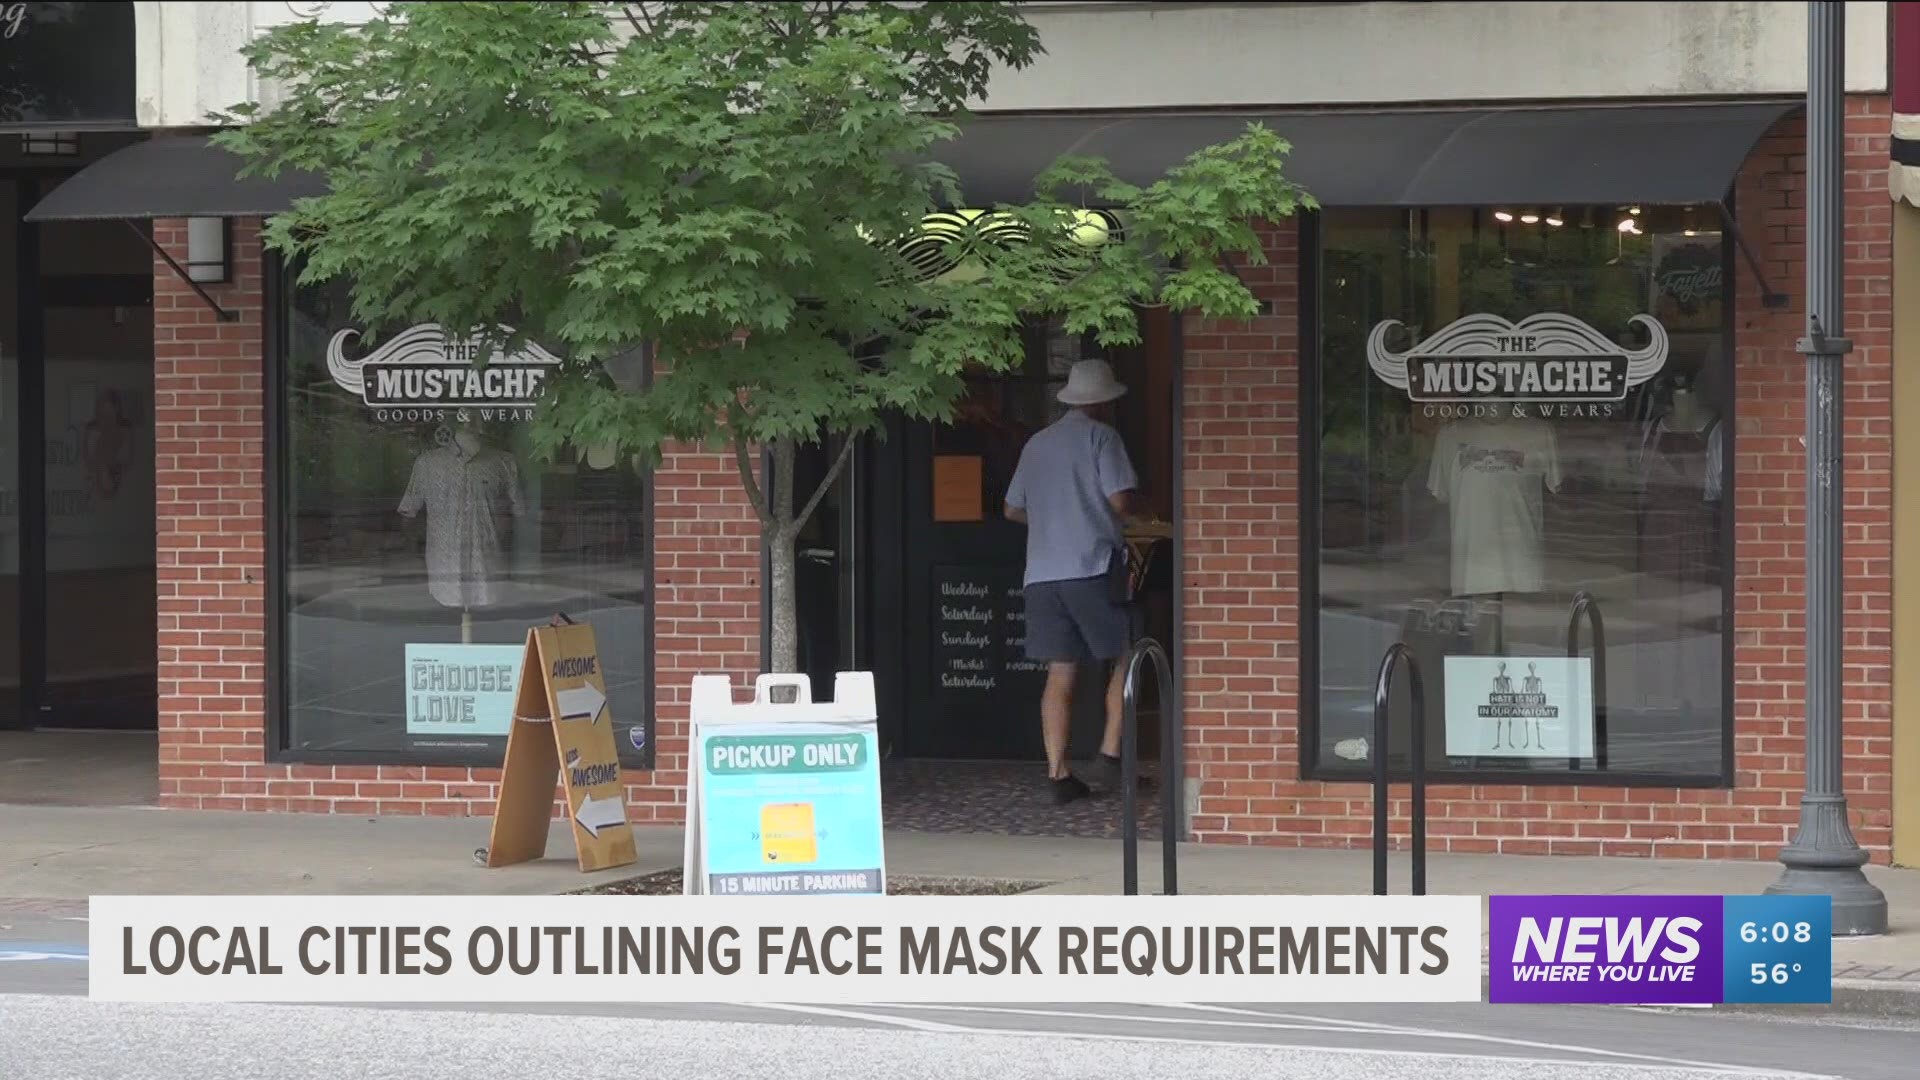 Local cities outline face mask requirements despite statewide mandate being lifted